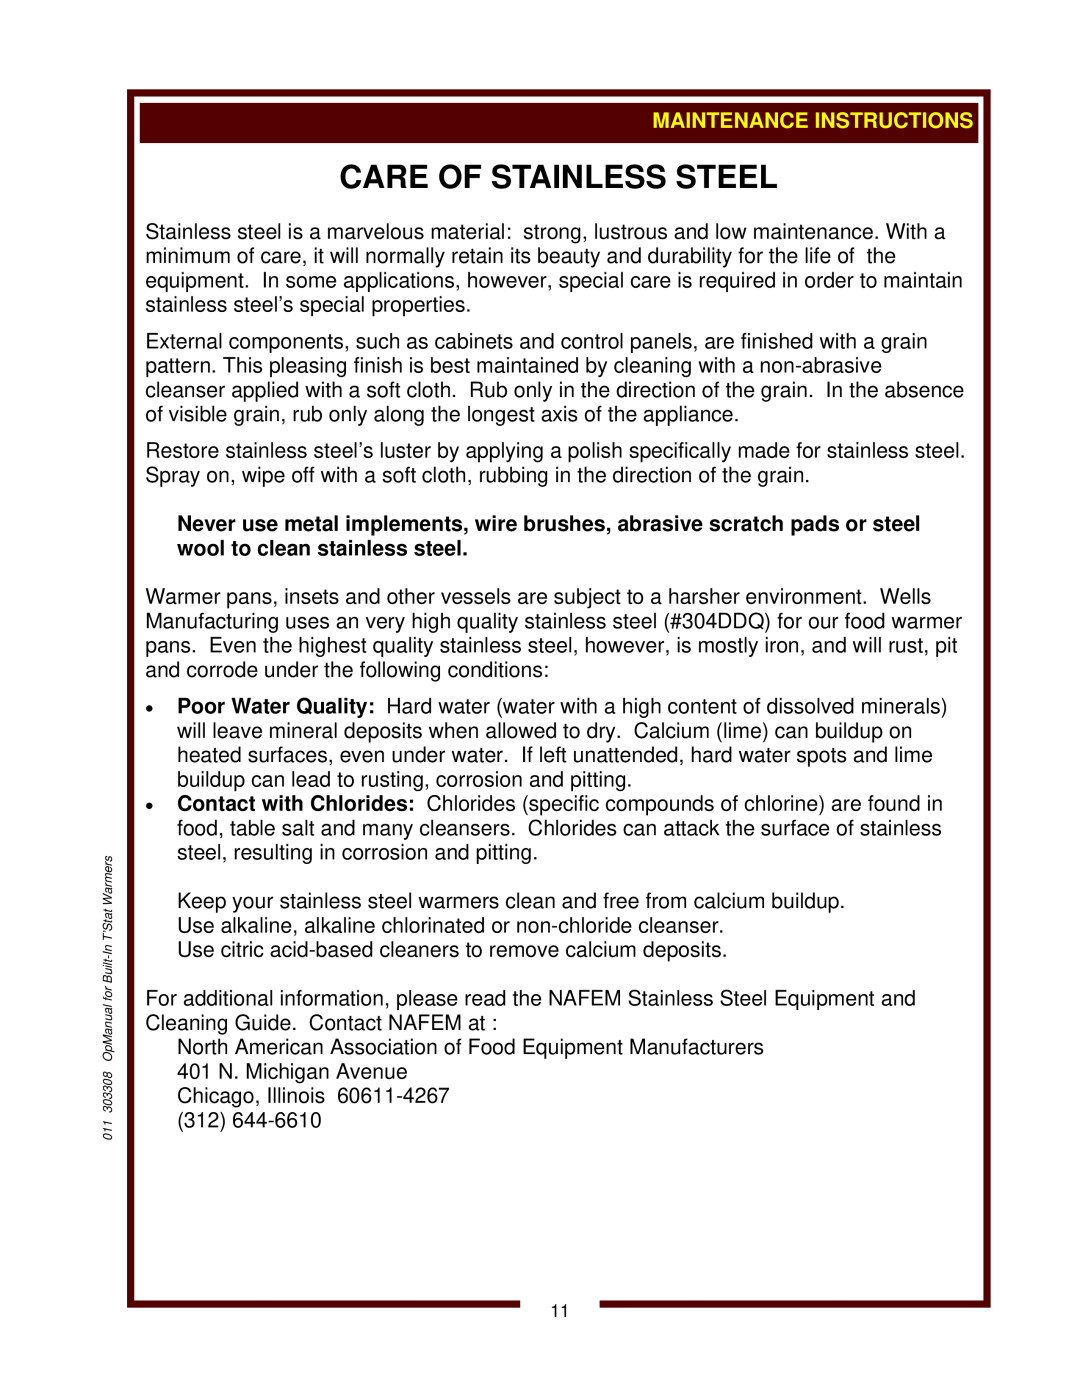 Wells MOD-427TDMAF, SS-10ULTD, BMW-206RTD operation manual Care Of Stainless Steel 